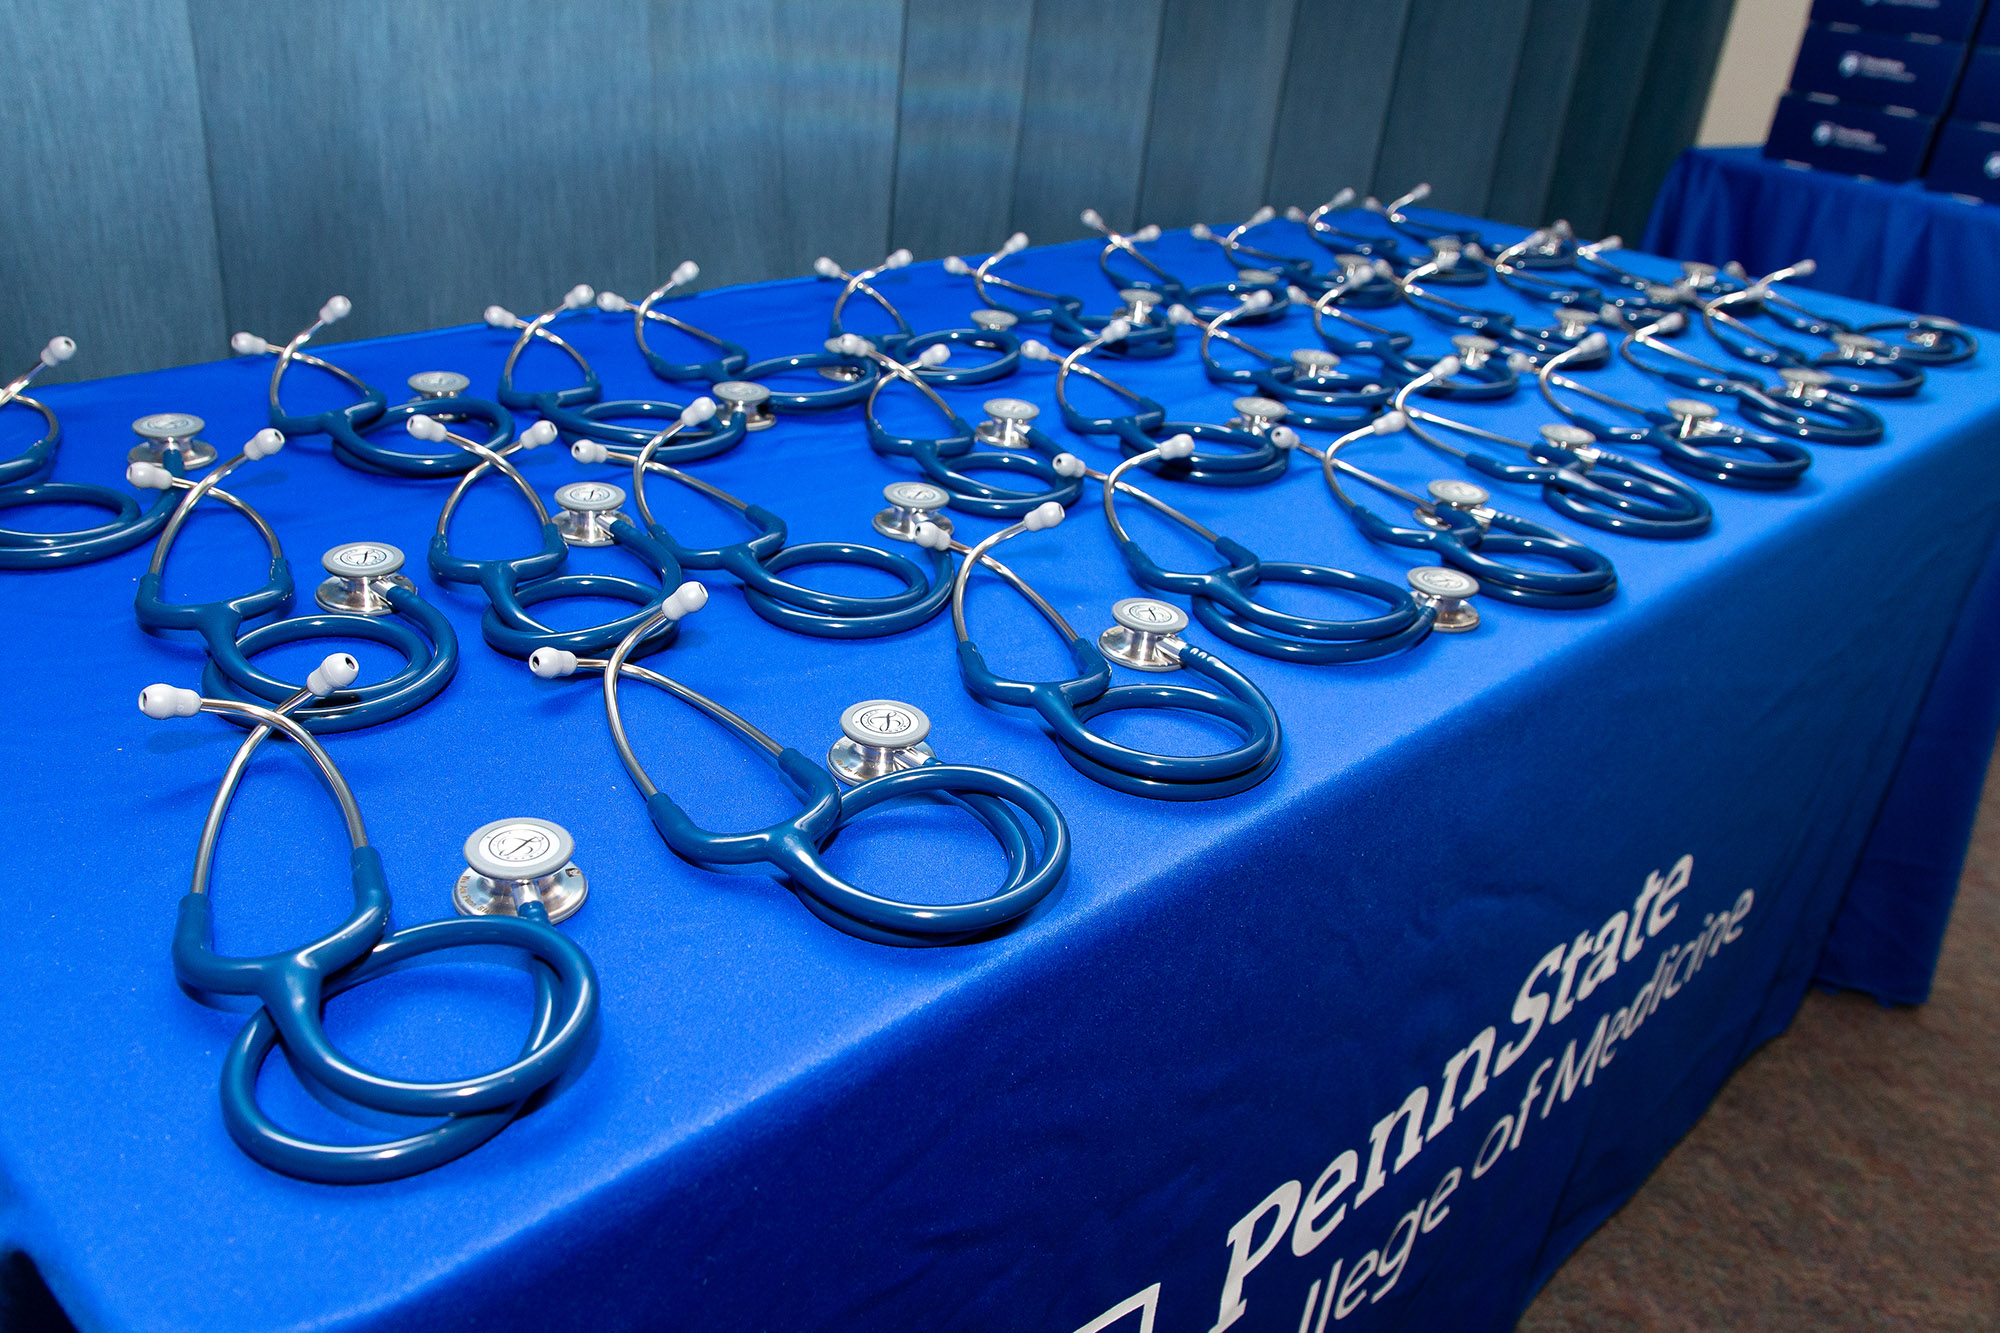 Stethoscopes lie on a table covered in a blue Penn State College of Medicine cloth